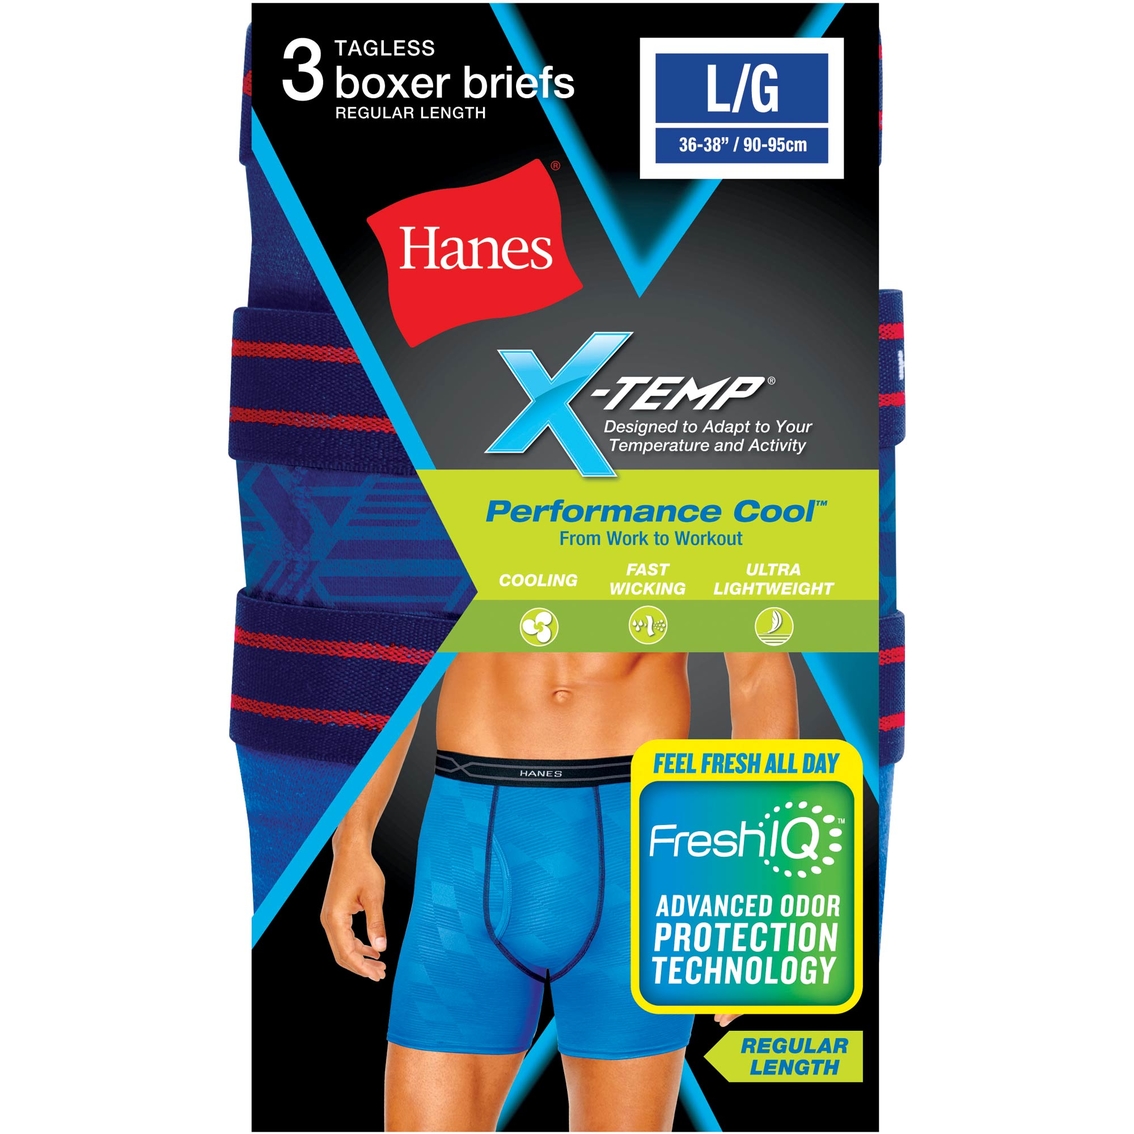 Hanes Performance Cool X-temp Embossed Boxer Brief 3k., Underwear, Clothing & Accessories